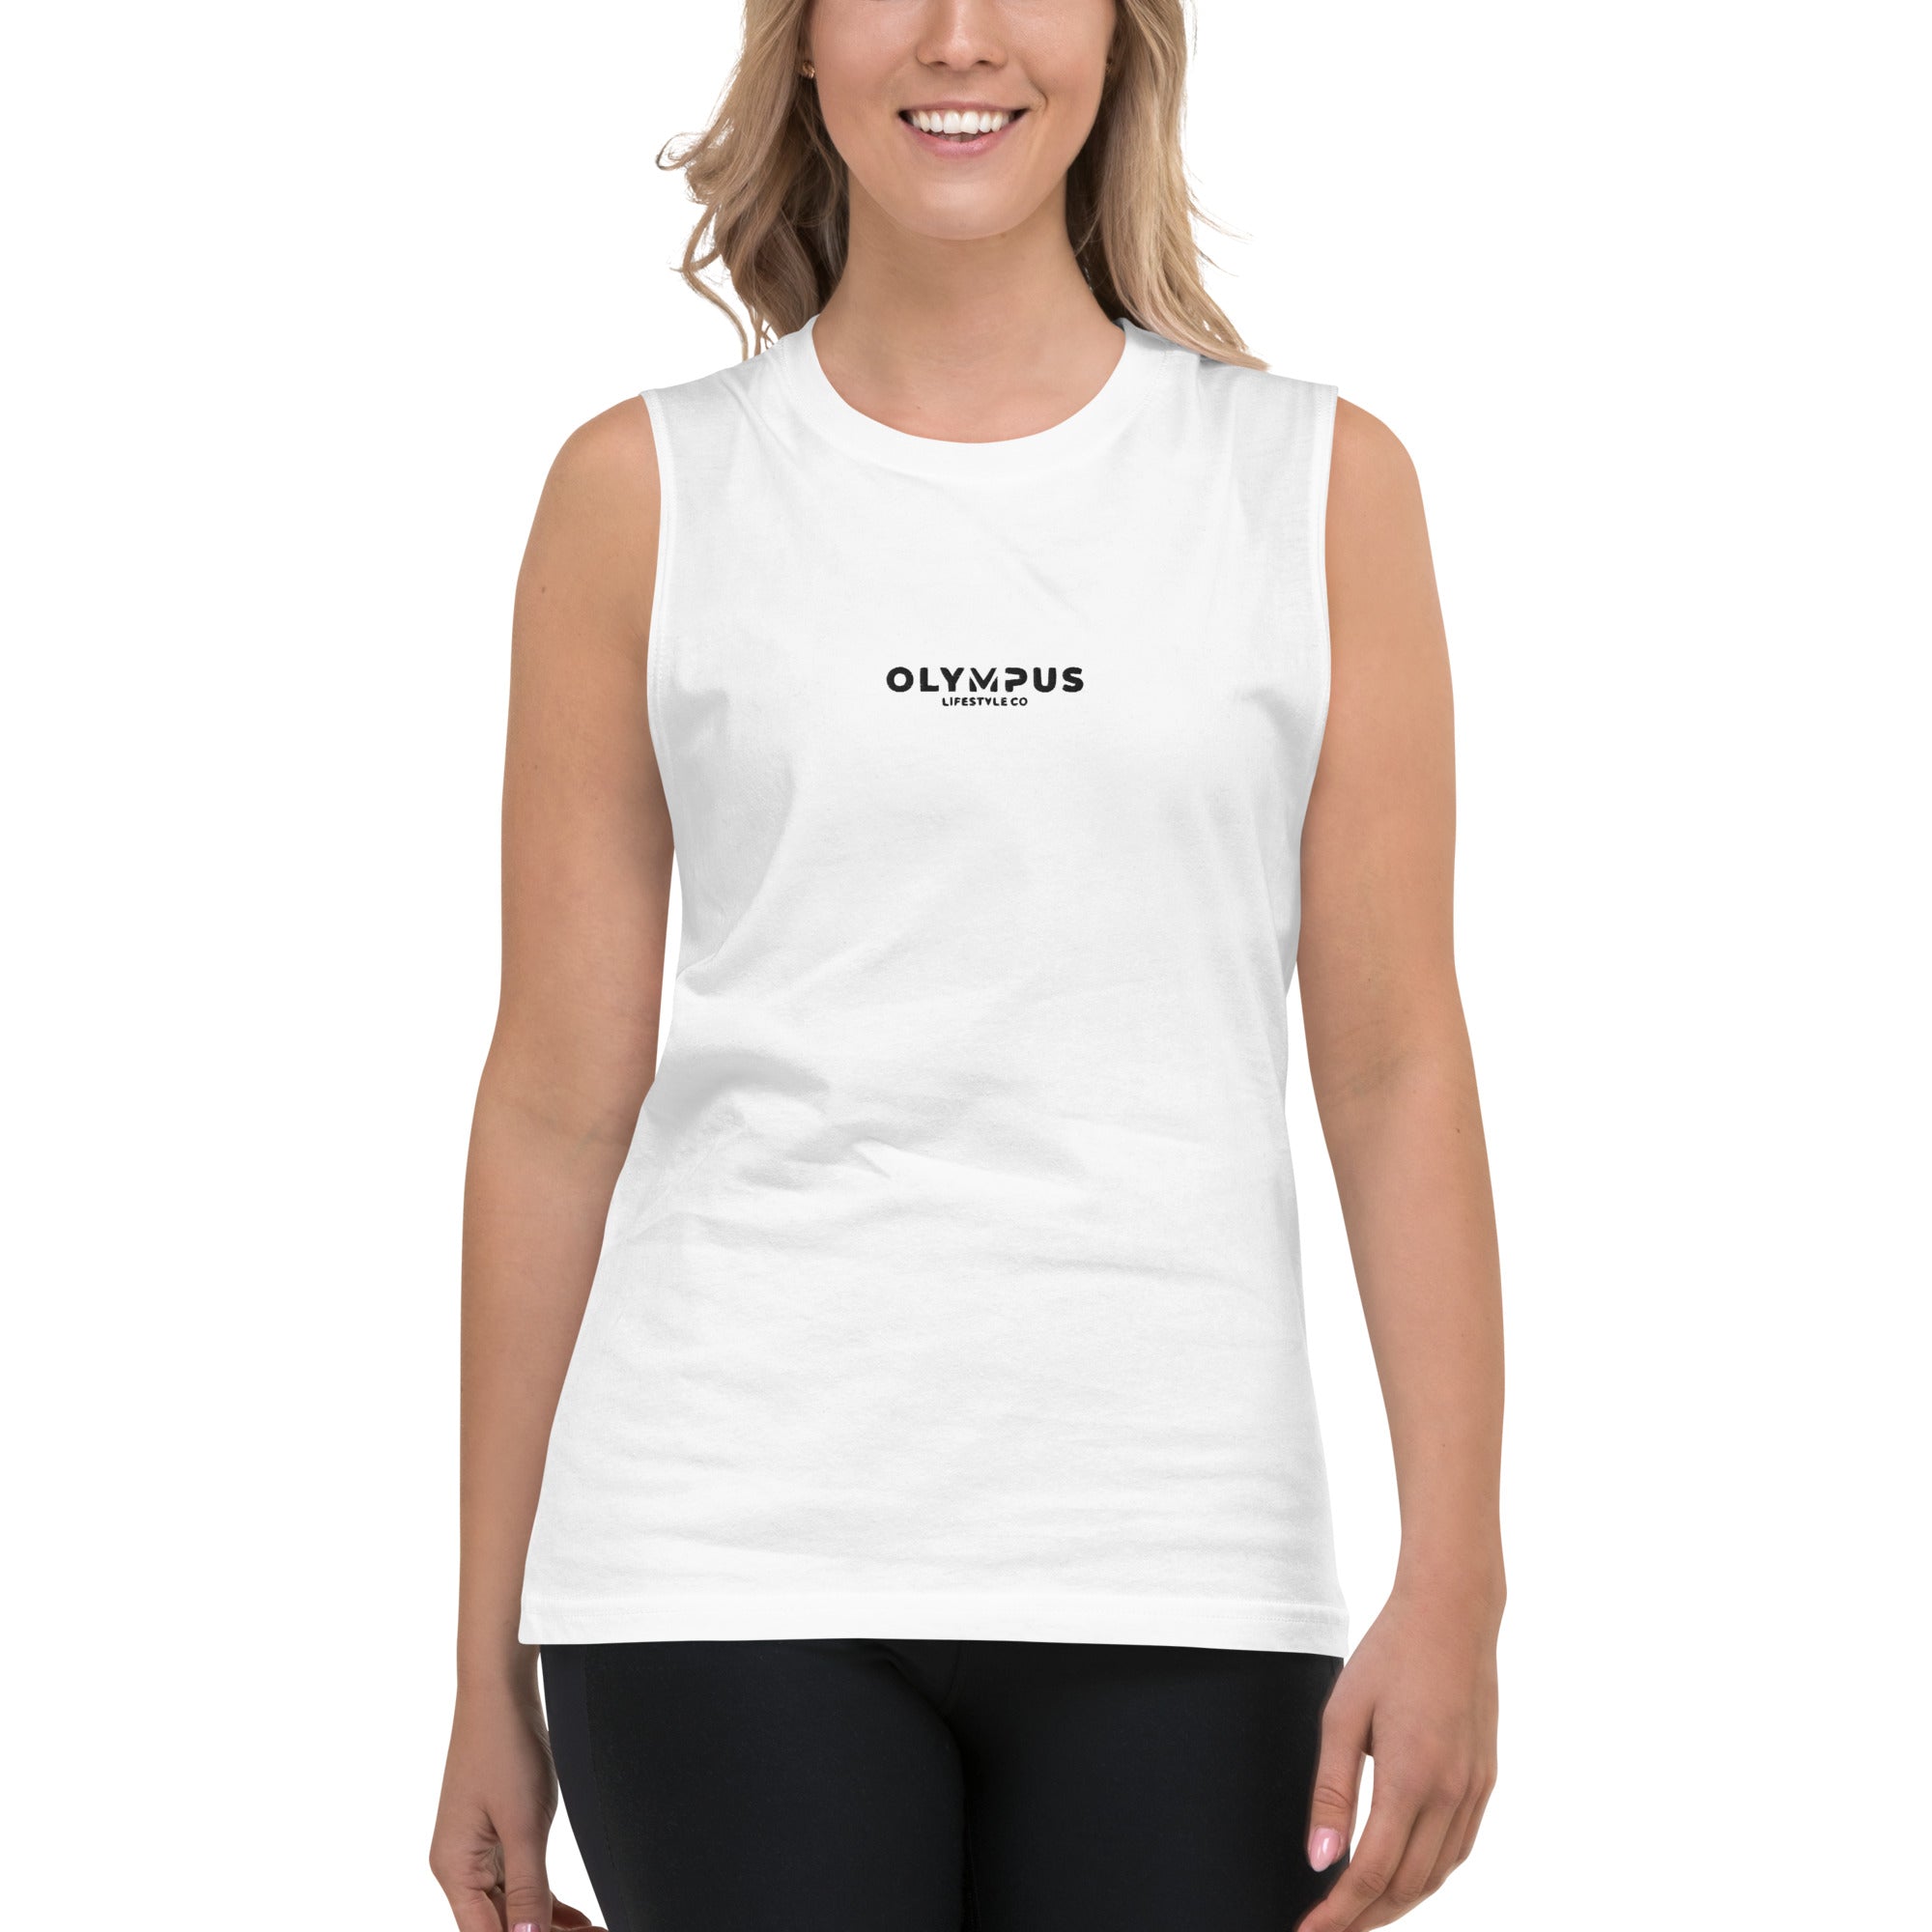 Olympus Women's Embroidered Muscle Shirt Black Text Logo